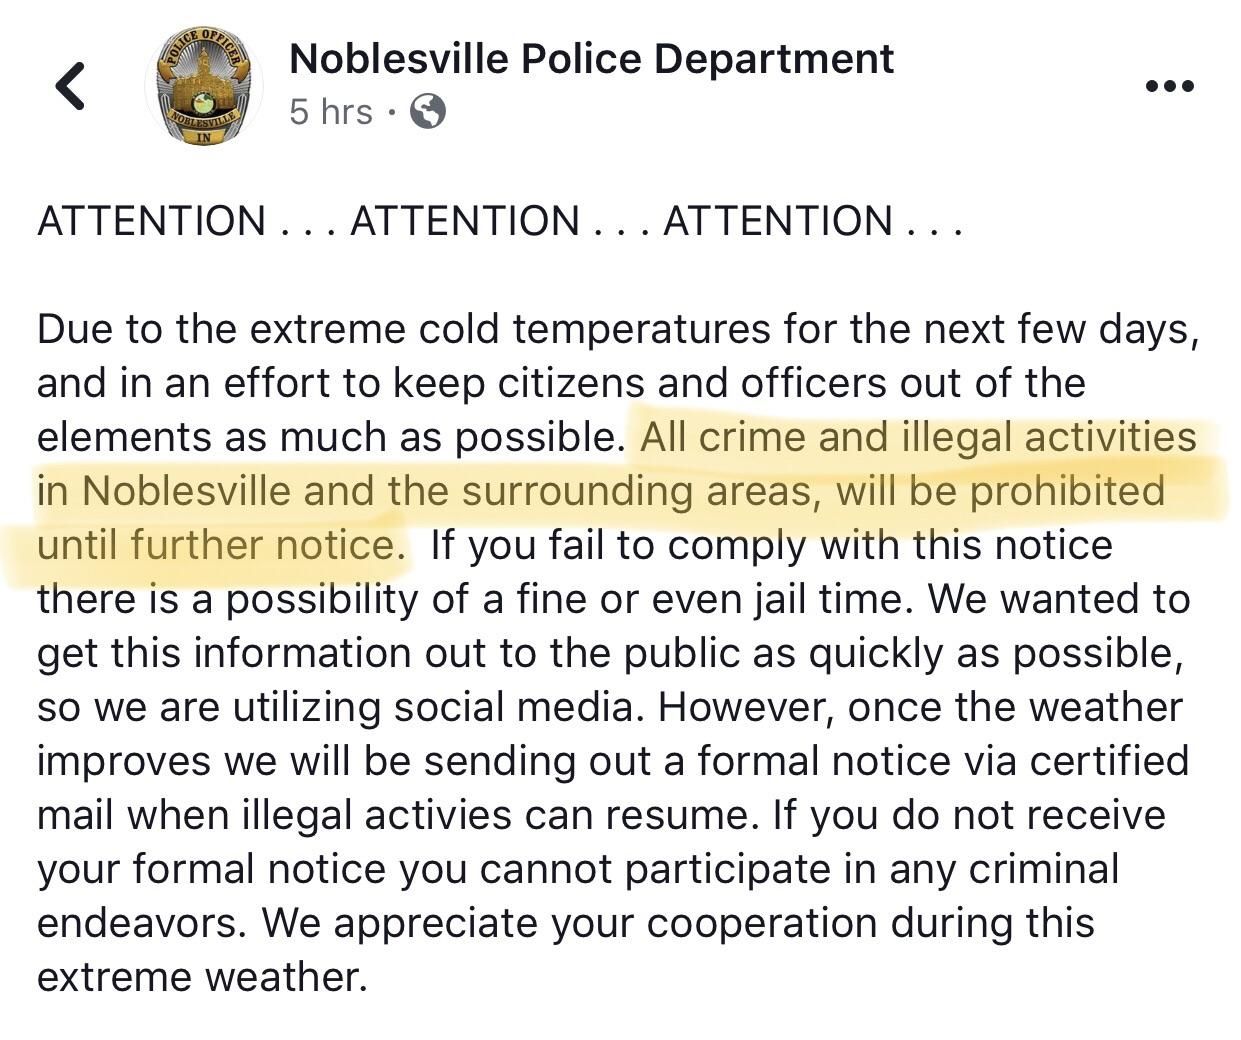 It’s so cold police out here banning crime